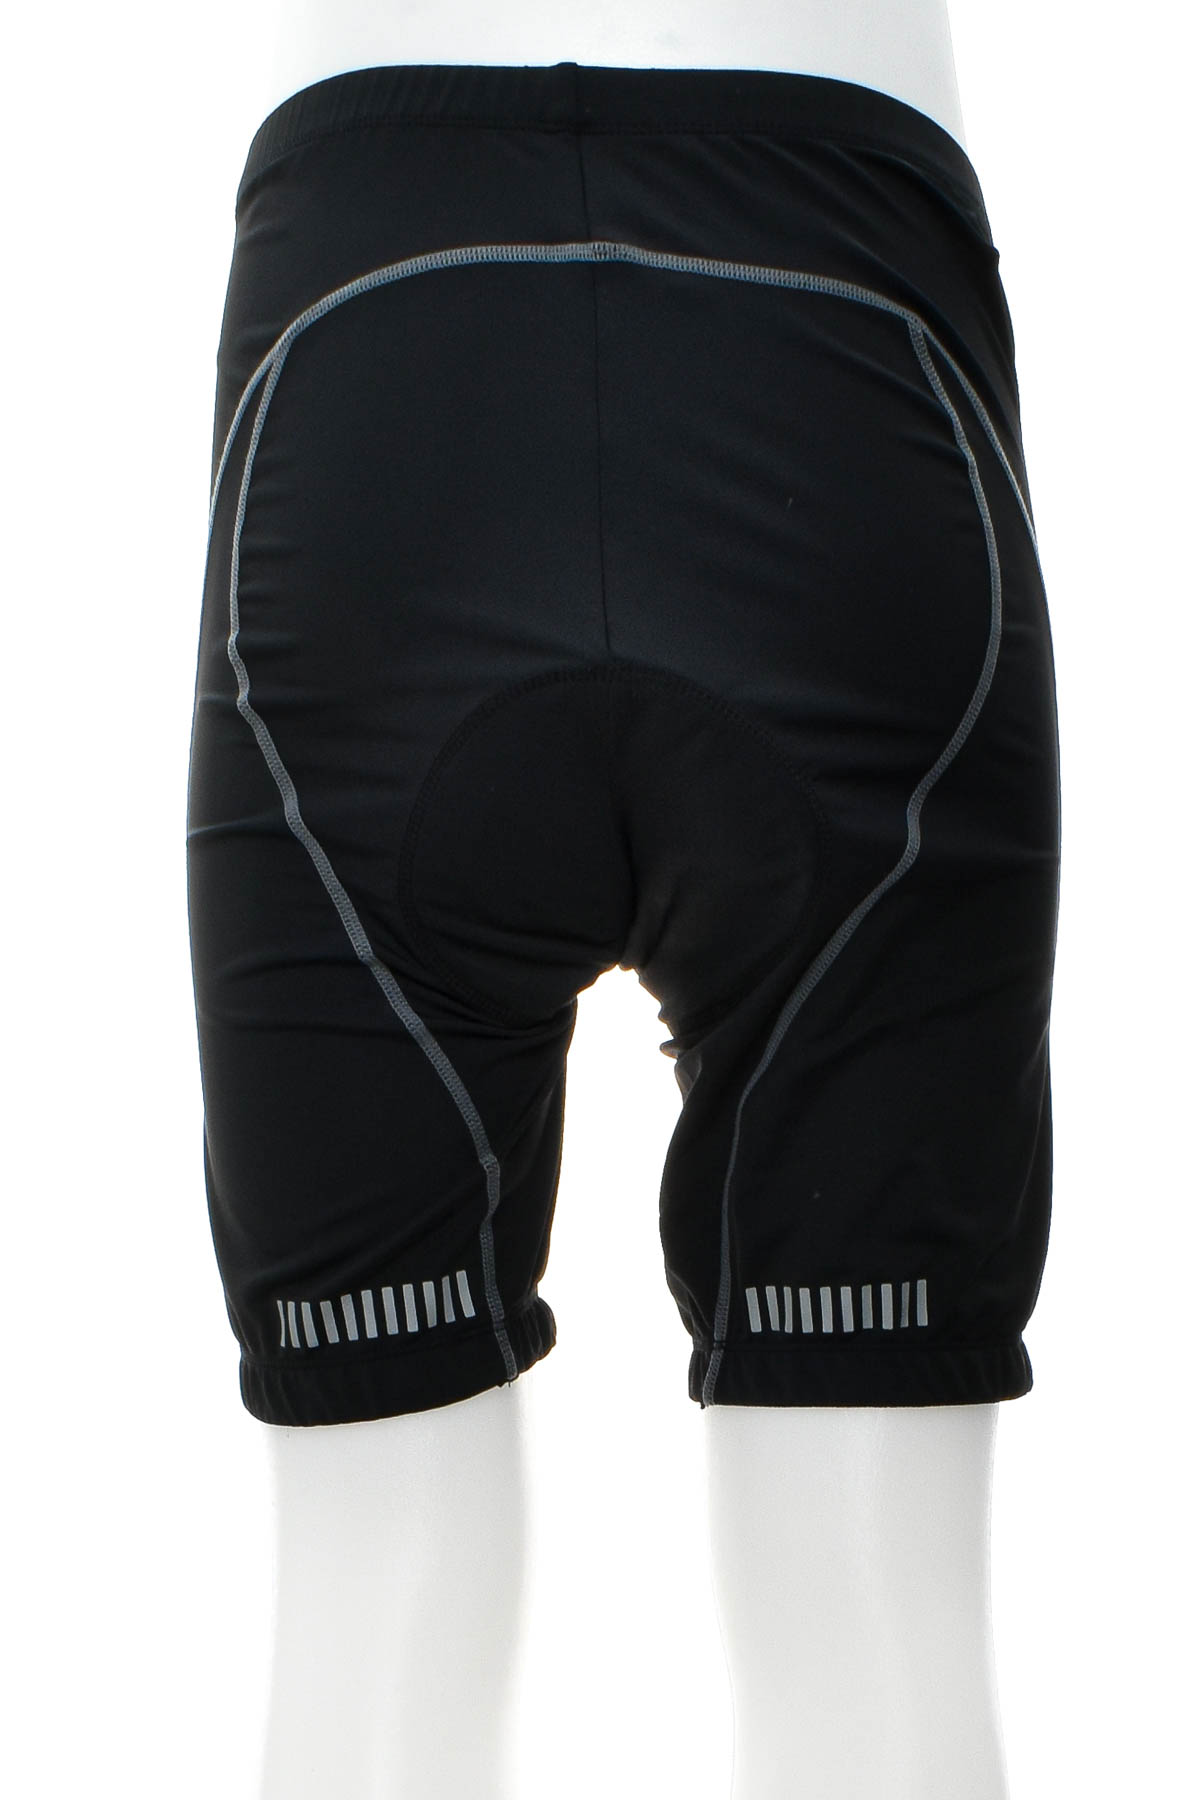 Men's shorts for cycling - NOOYME - 1